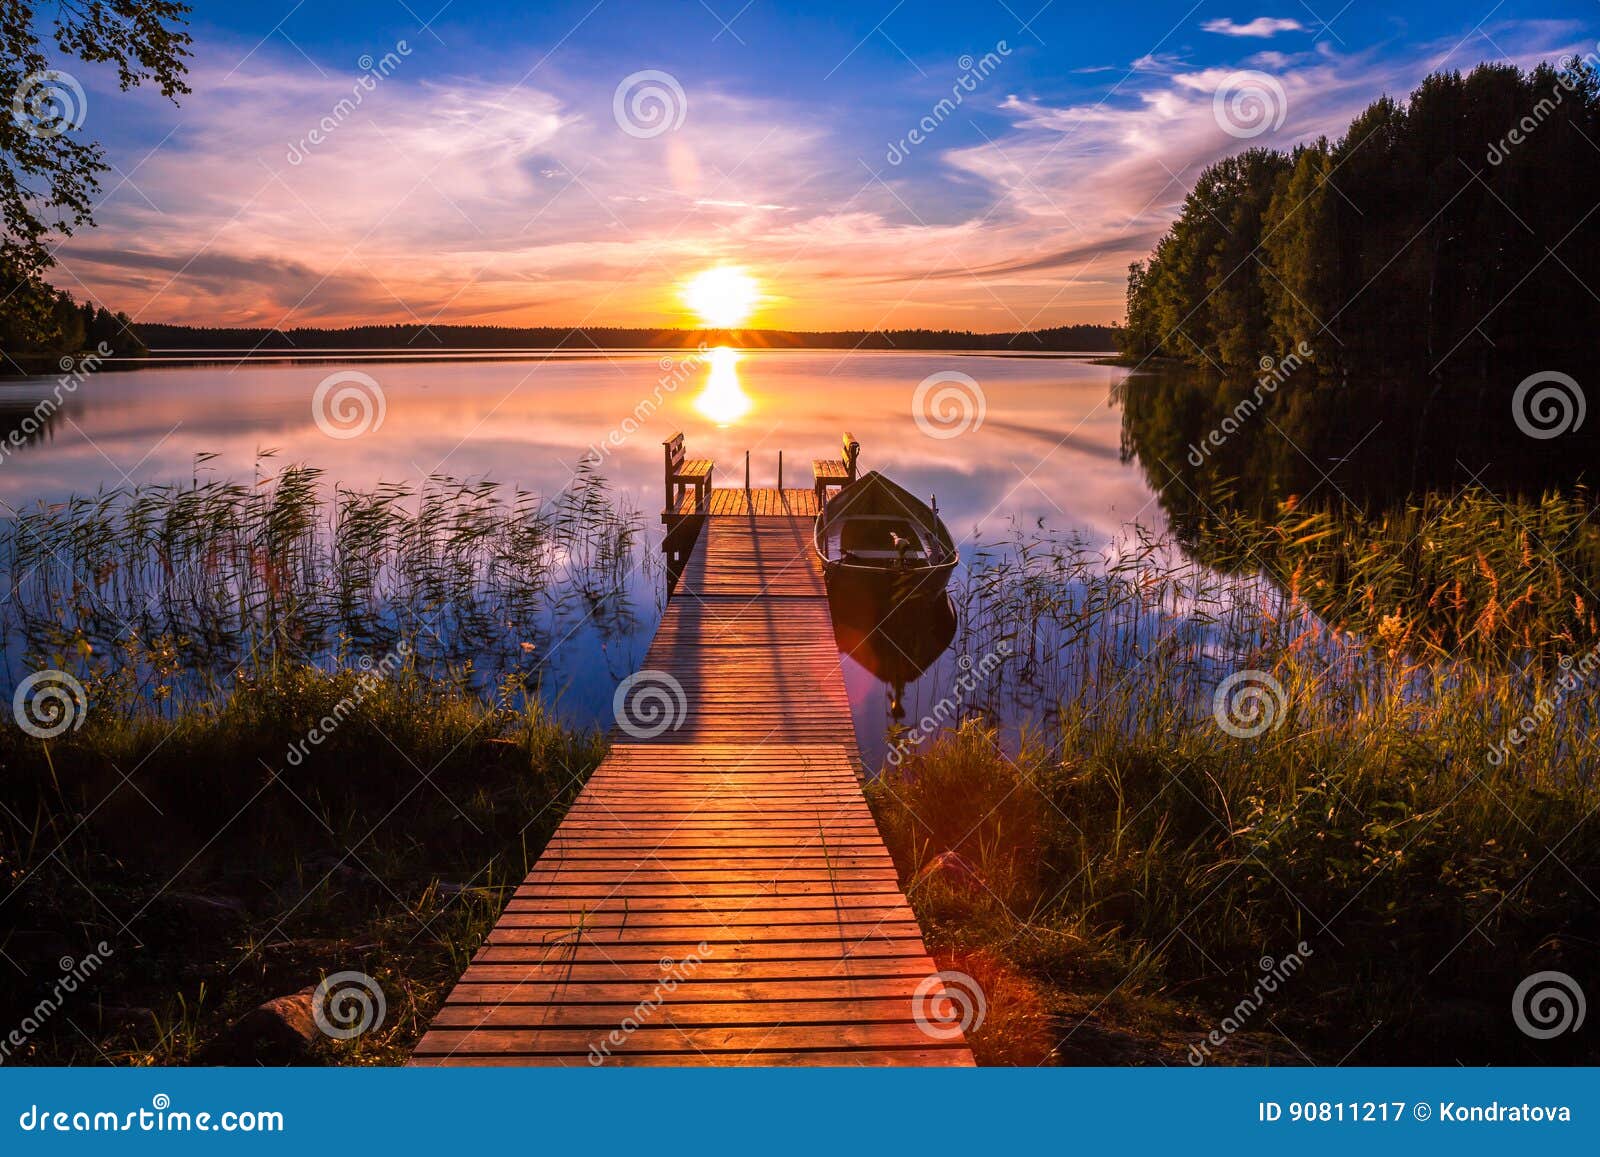 sunset over the fishing pier at the lake in finland